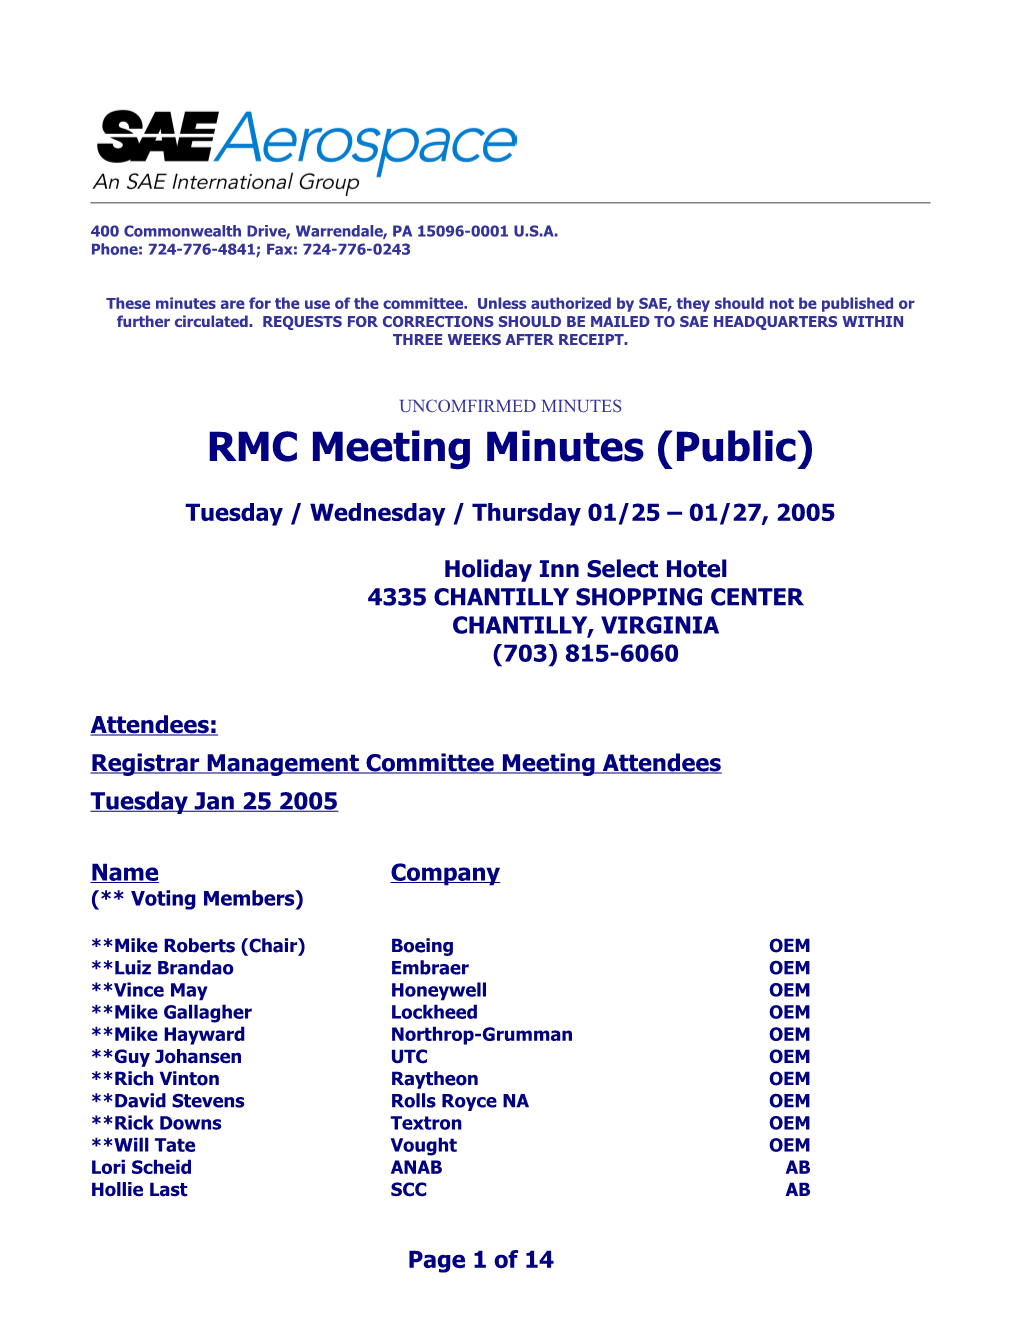 RMC Meeting Agenda: (Monday Afternoon 6/10 & Wednesday Morning 6/11)